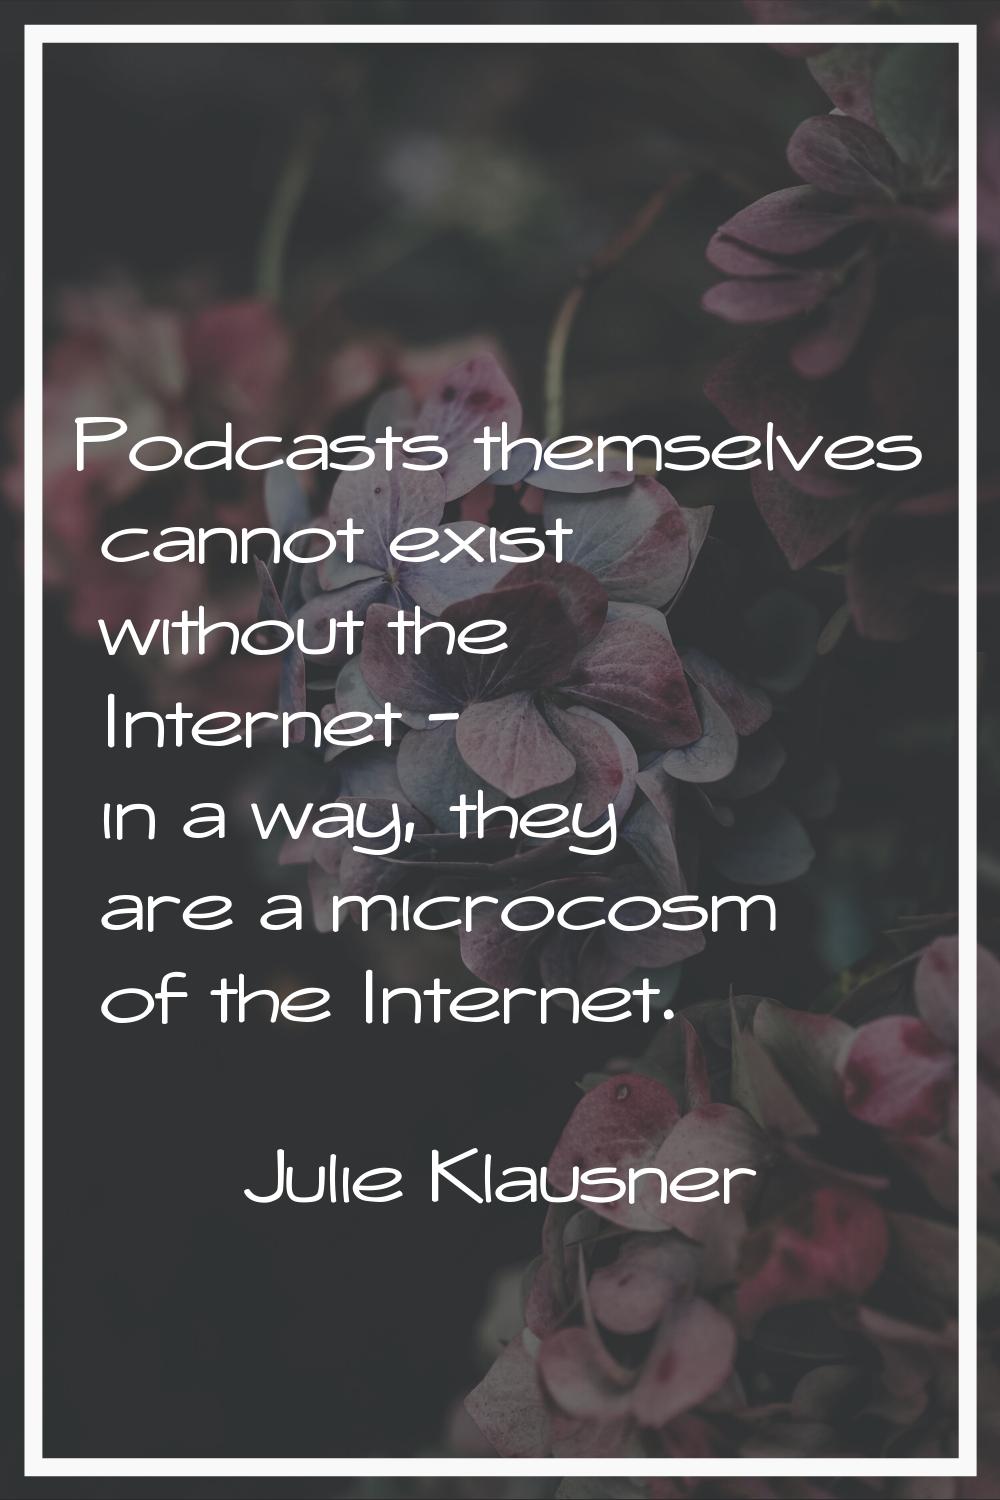 Podcasts themselves cannot exist without the Internet - in a way, they are a microcosm of the Inter